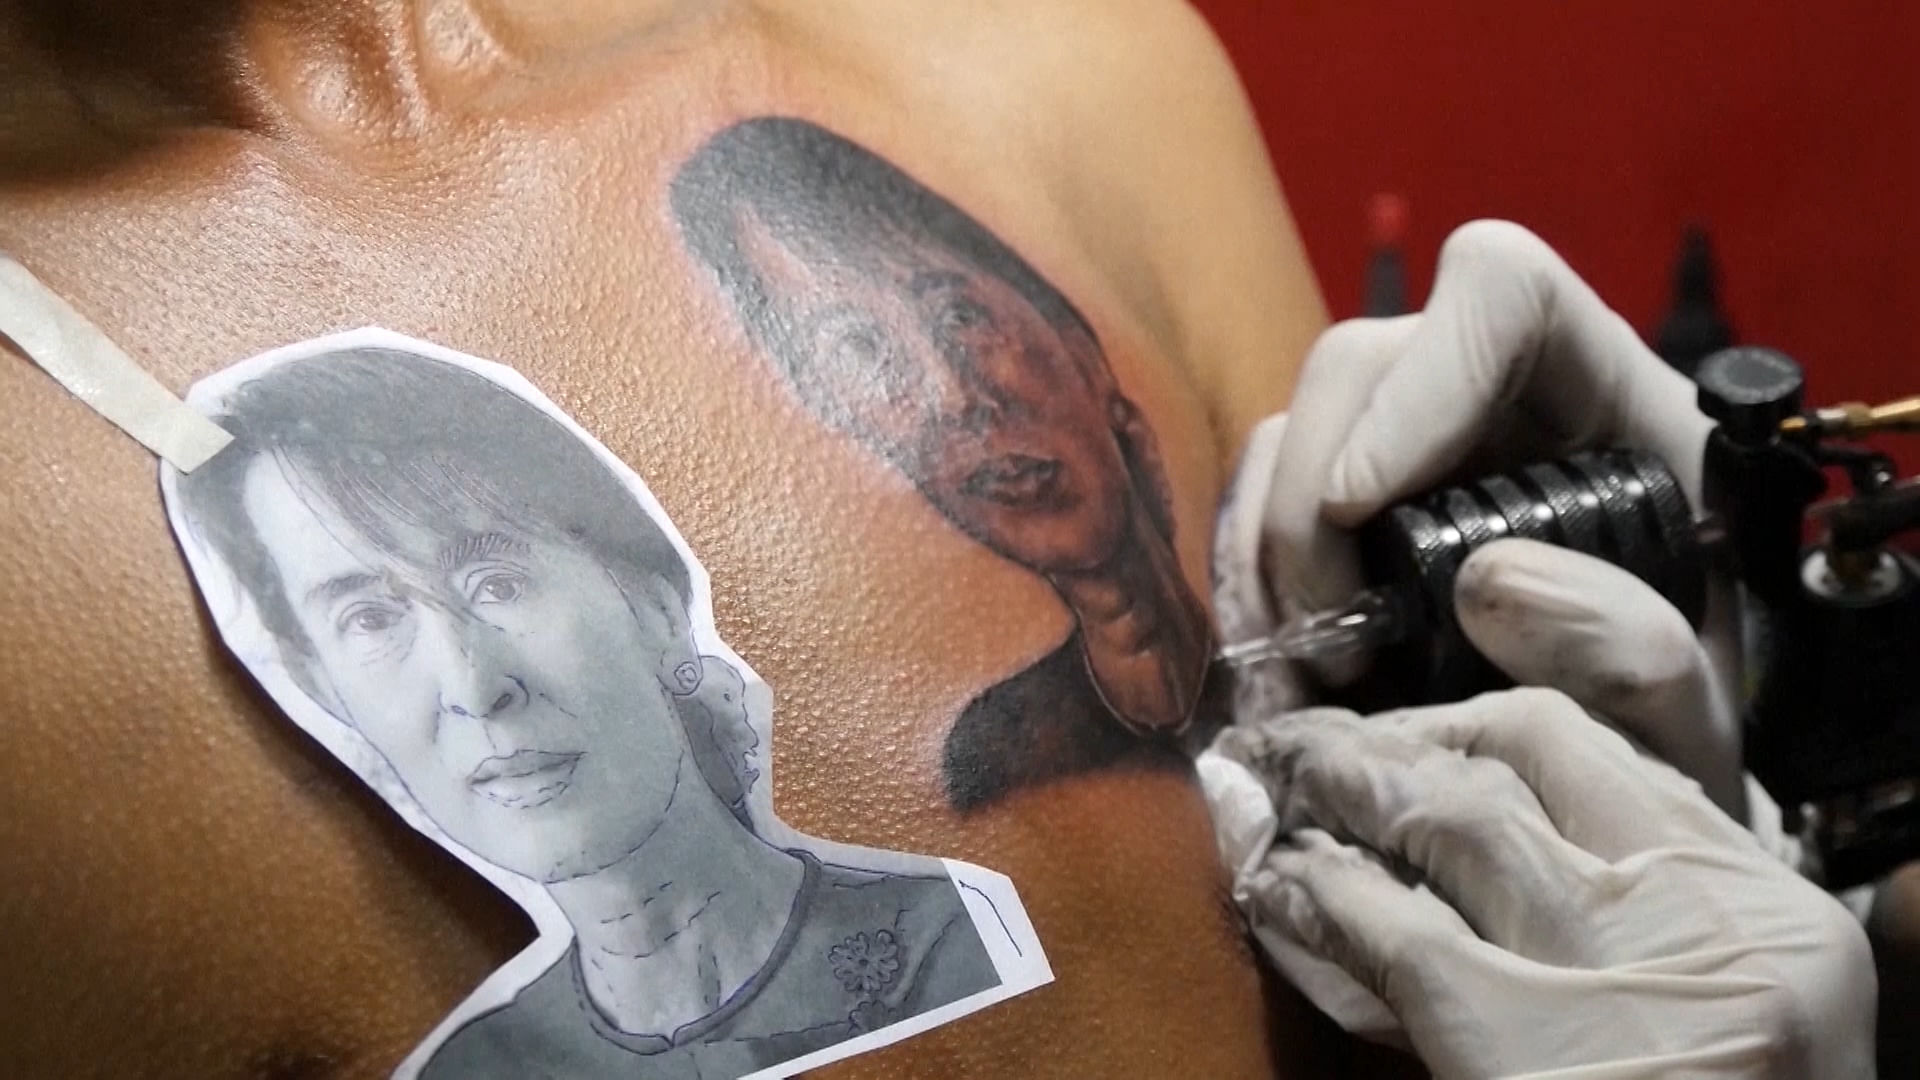 Aung San Suu Kyi’s landslide victory in November elections last year has increased the number of people who want to get her tattoo. (Photo: AP Screengrab)